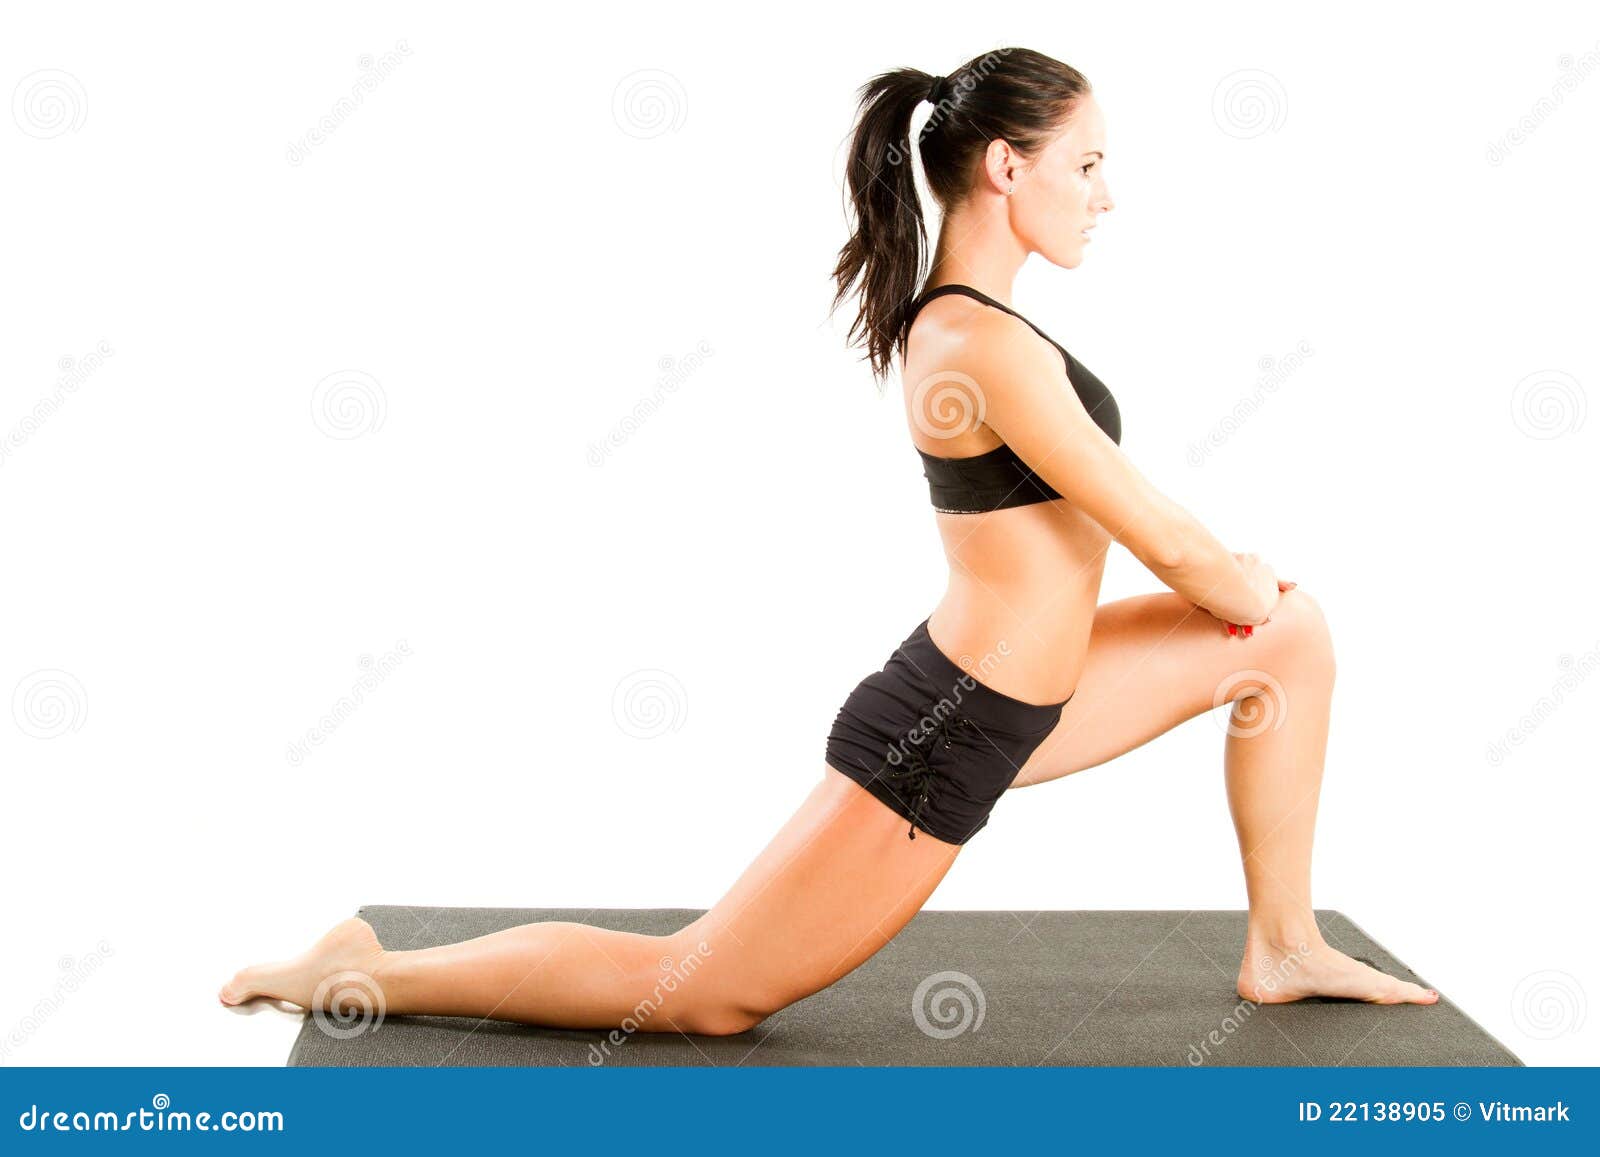 8 Yoga-Based Hip Stretches to Relieve Tightness - Yoga Journal